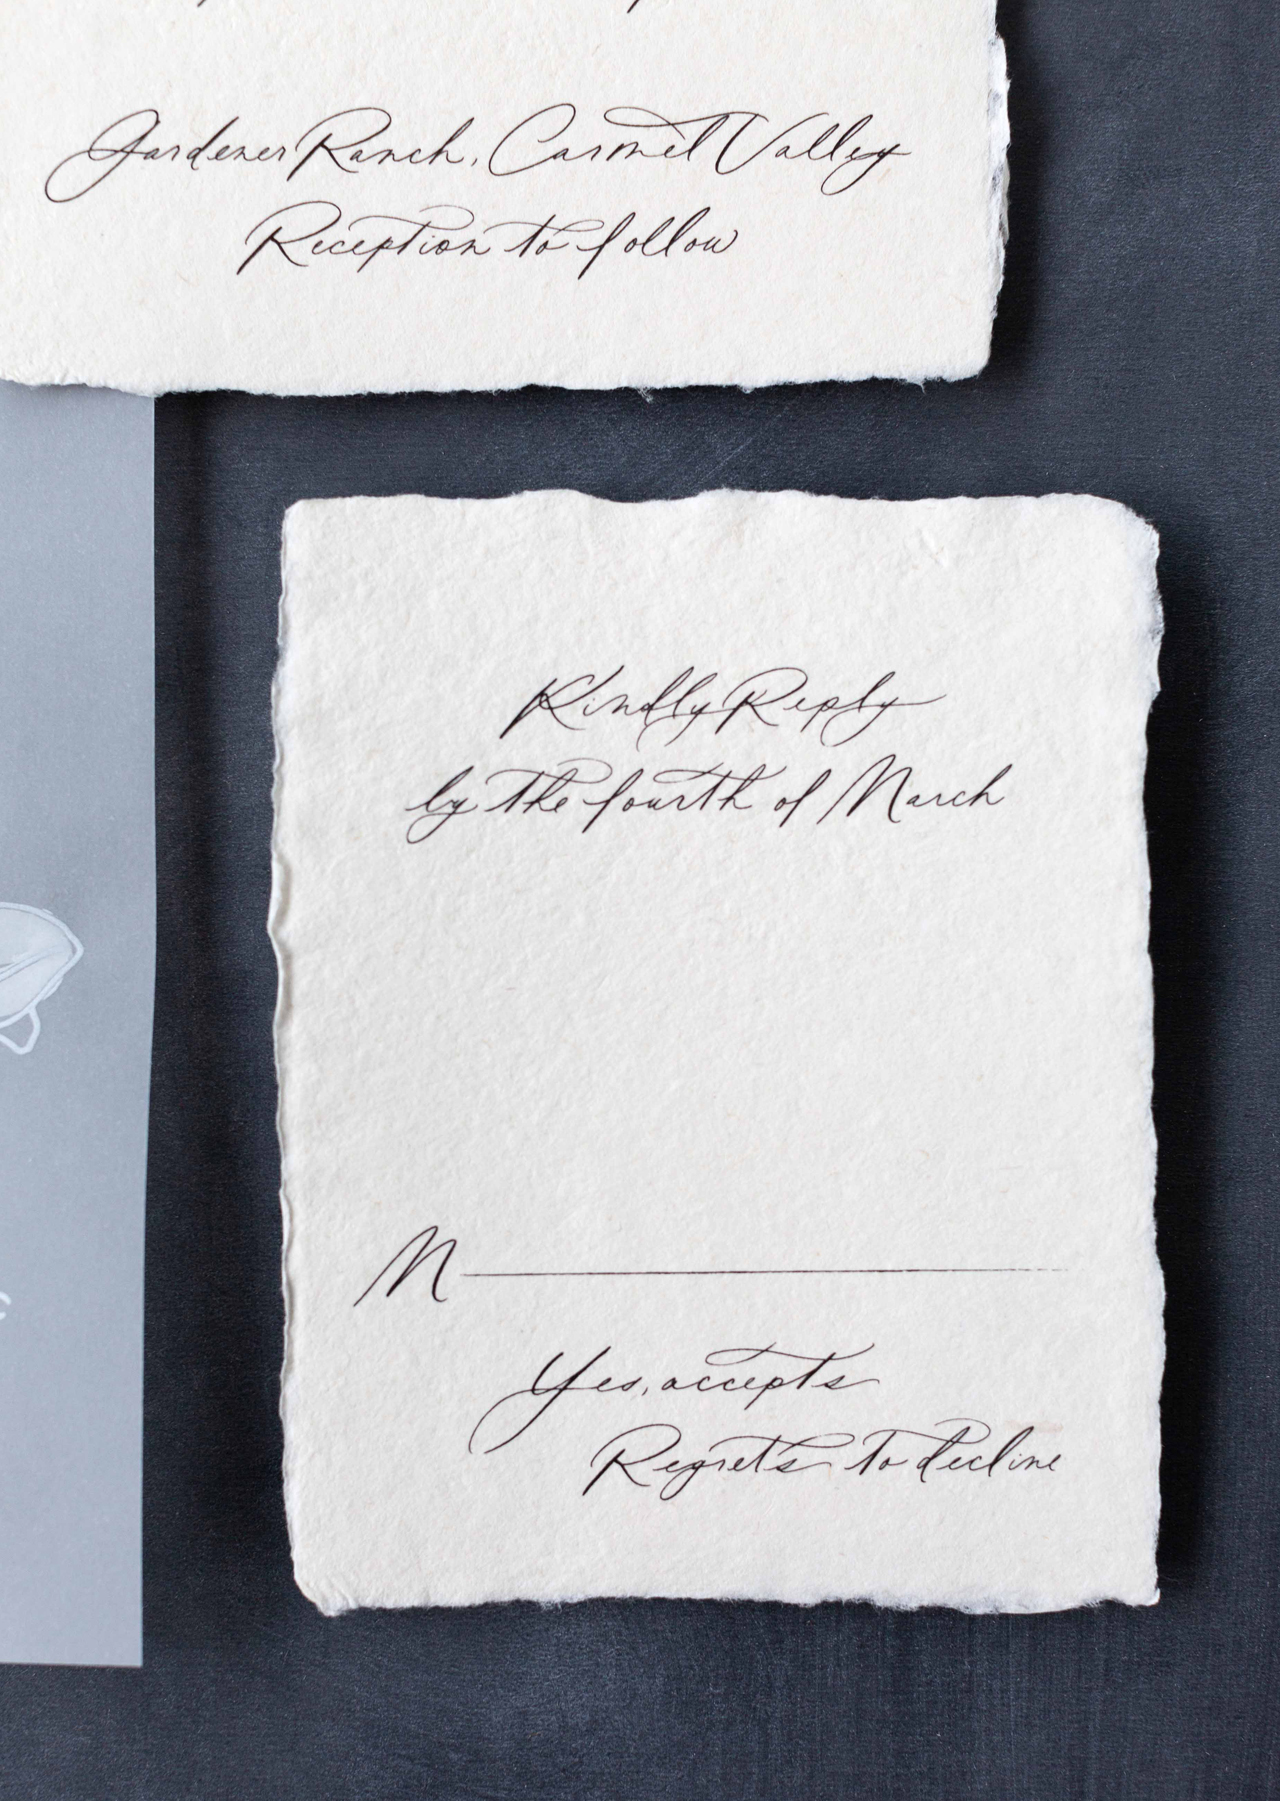 Romantic Calligraphy Wedding Invitations on Handmade Paper by Plume Calligraphy